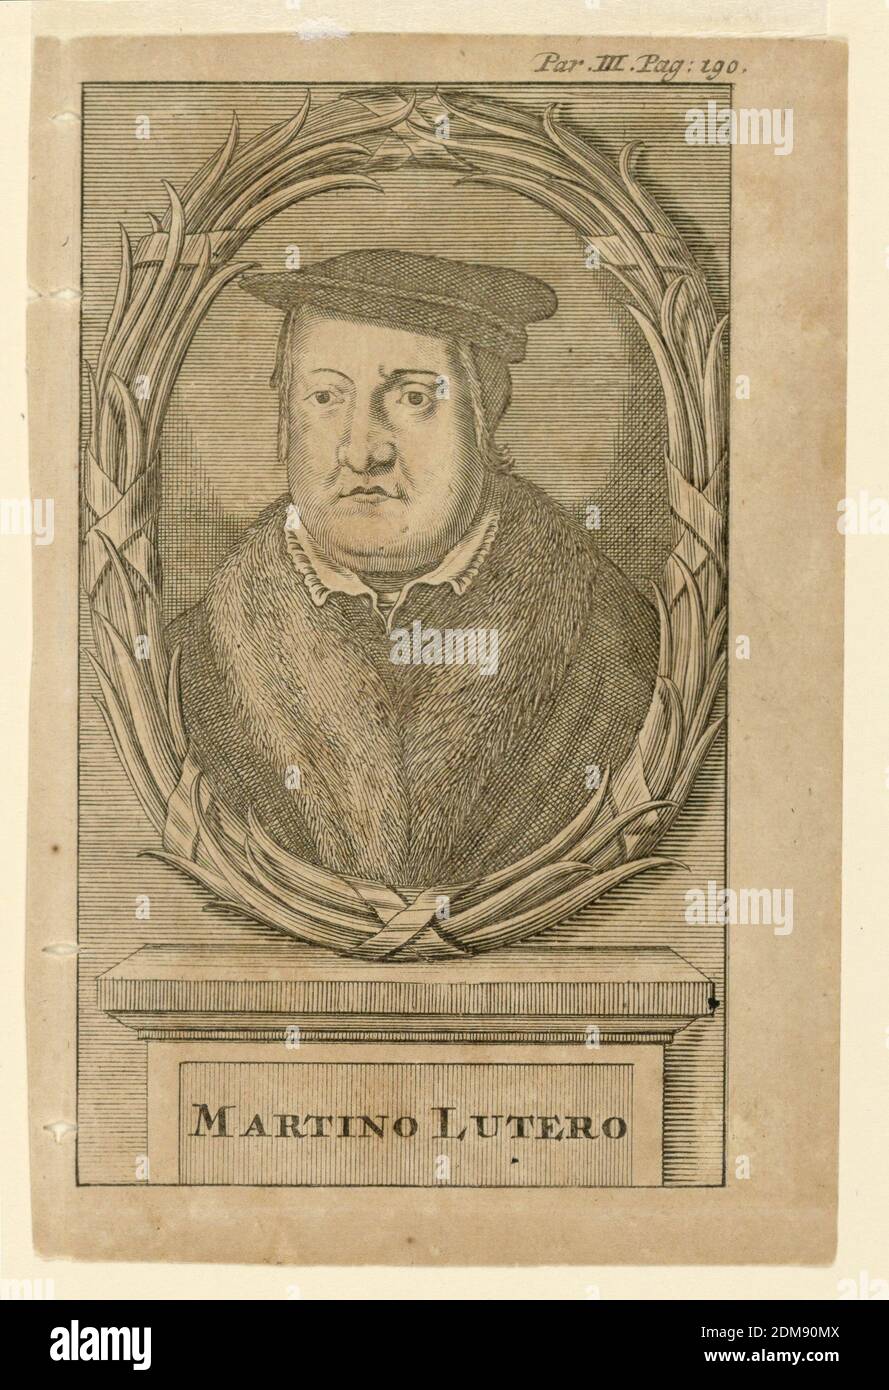 Portrait of Martin Luther (1483-1546), Engraving on paper, Bust-length portrait in frontal view. Luther is wearing a hat and a coat with a fur collar. The portrait is in an oval frame composed of palm leaves and tied with ribbons. It stands on a small inscribed pedestal., Italy, ca. 1725-1750, Print Stock Photo